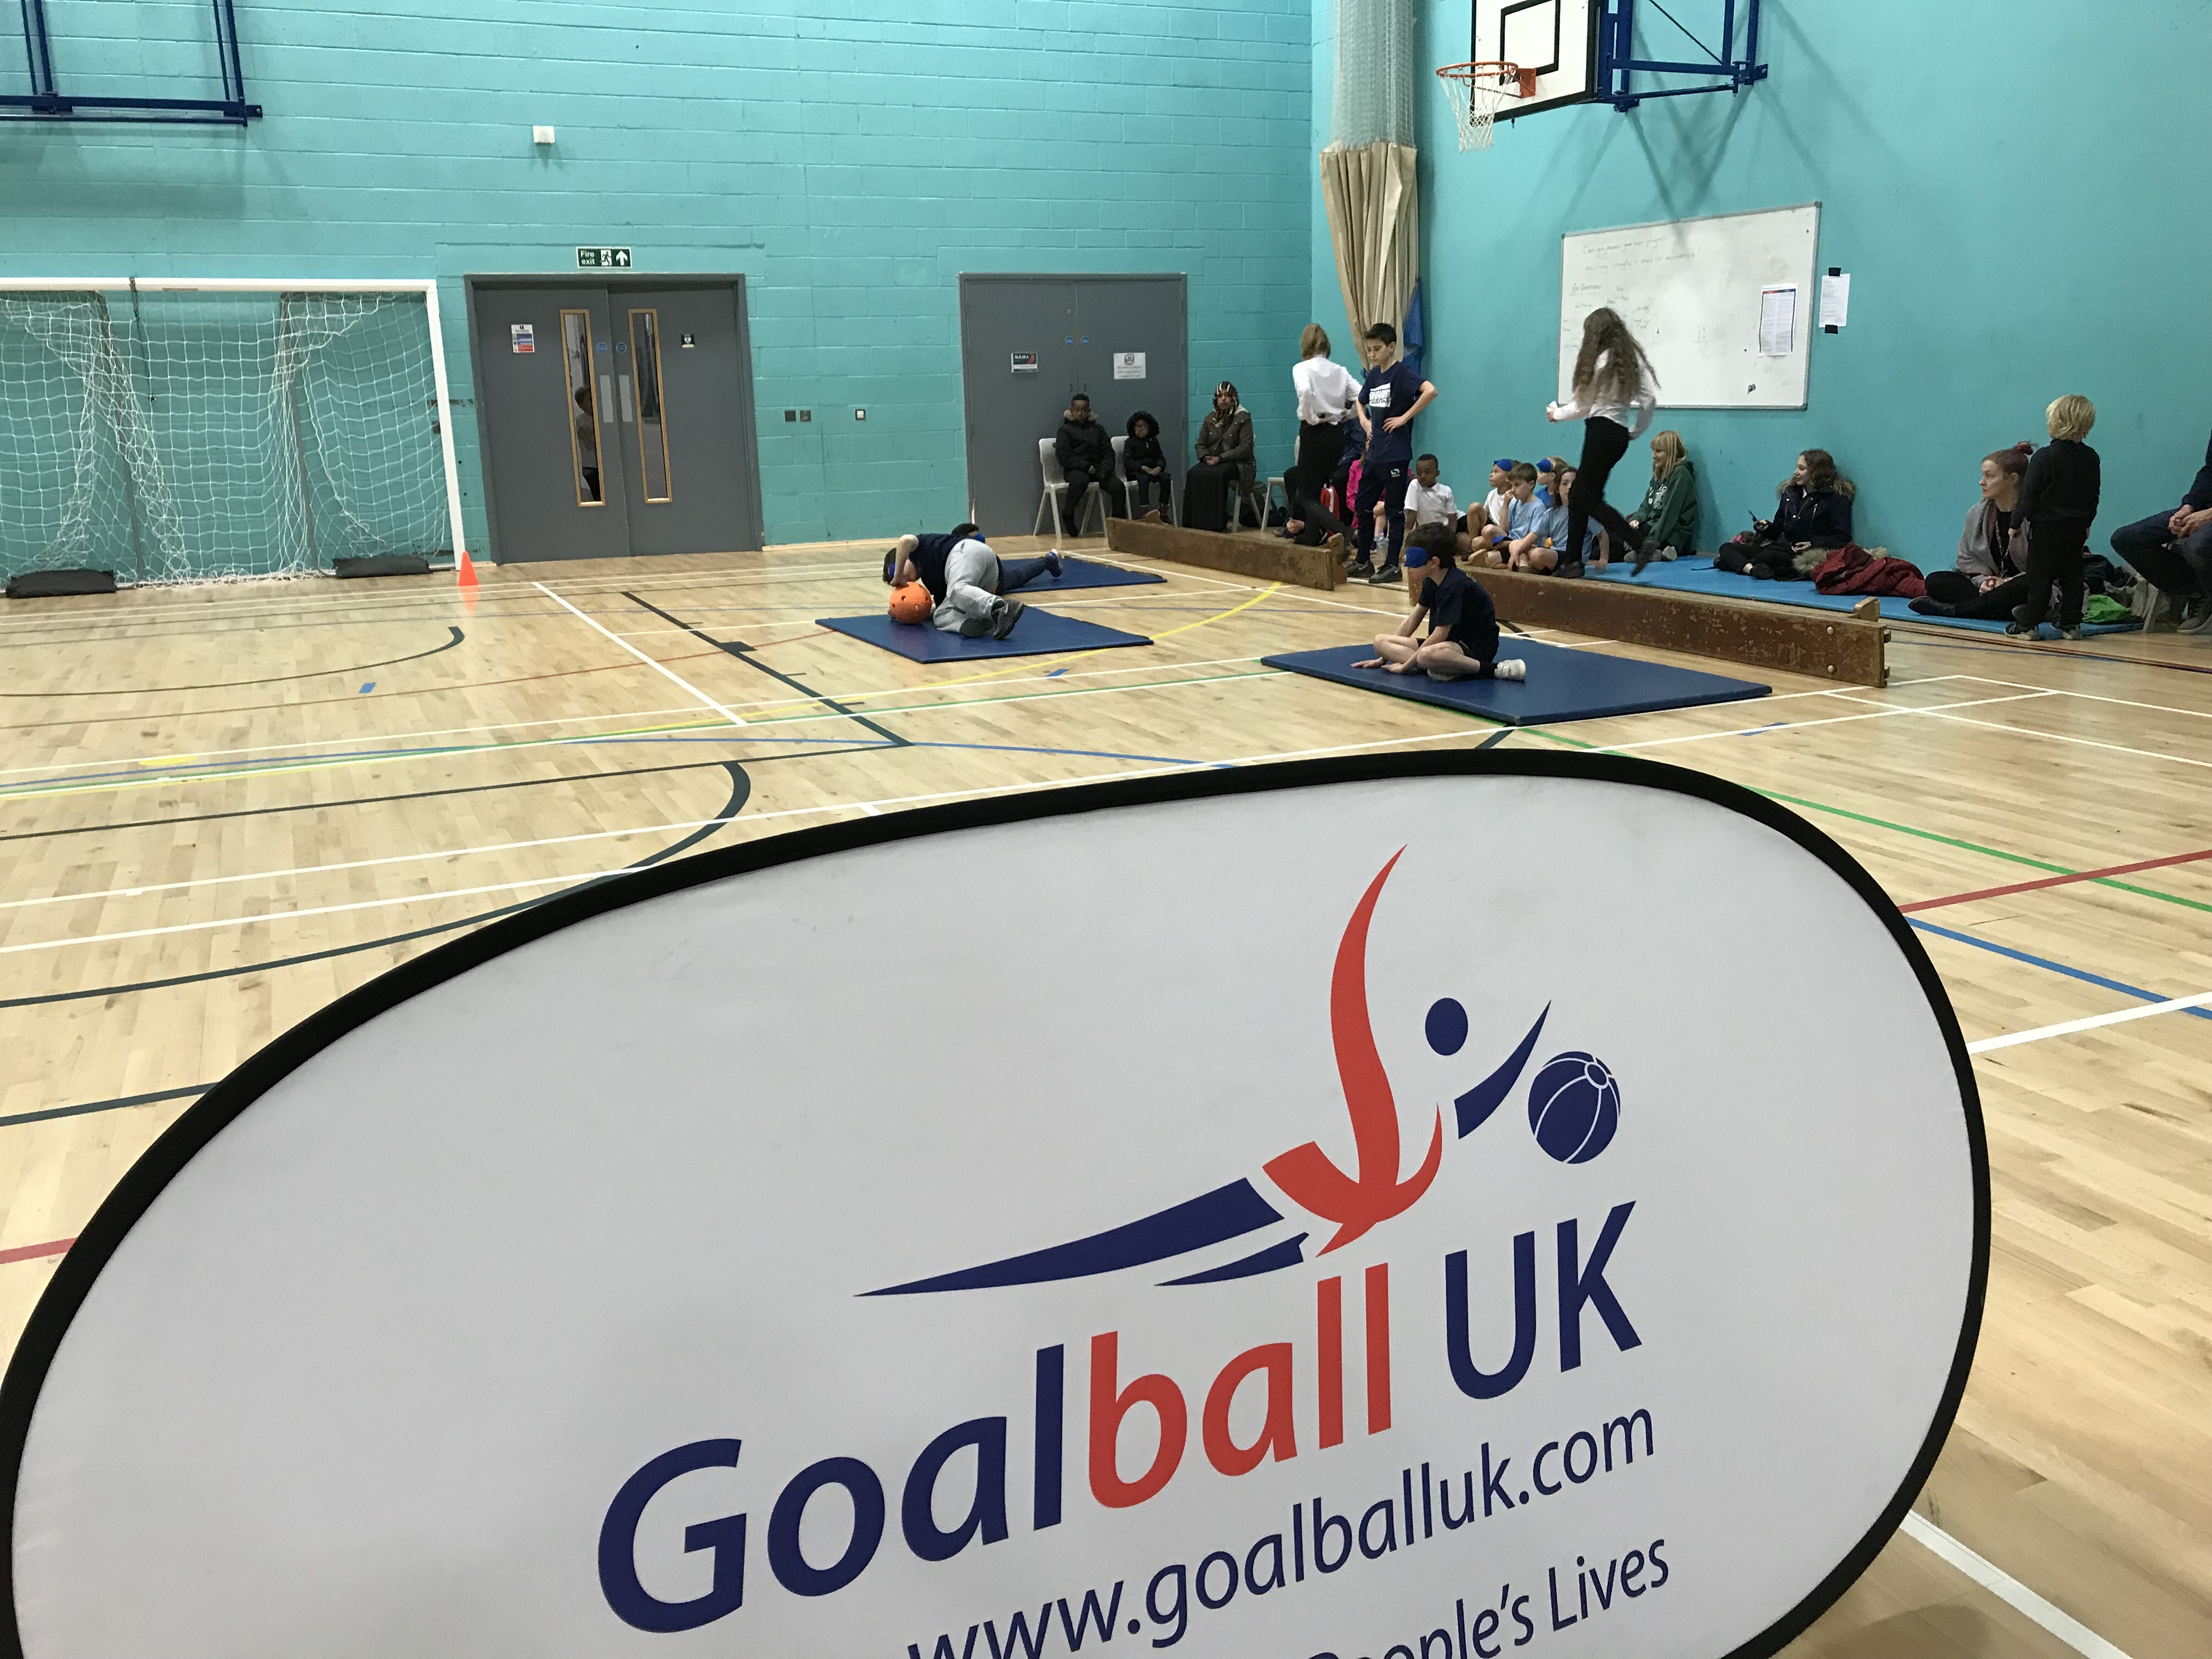 Photo with Goalball UK banner in foreground and school competition in background